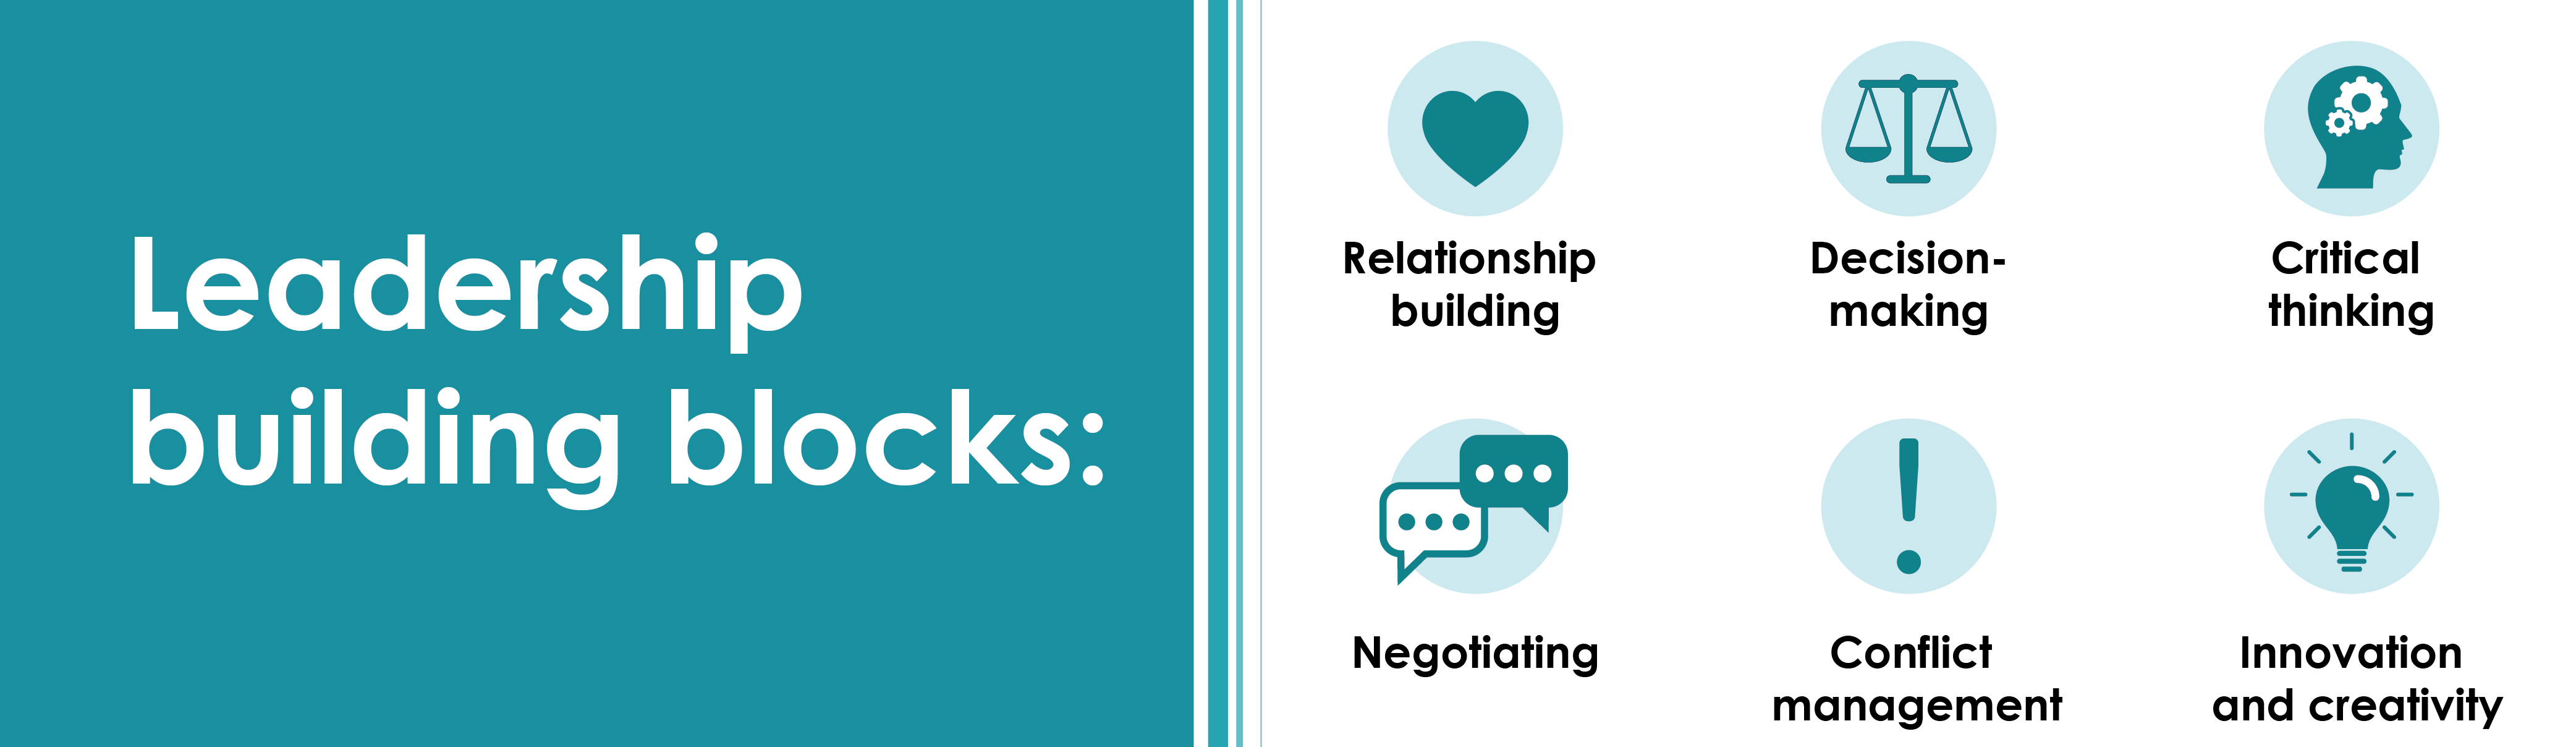 Infographic lists six leadership building blocks: relationship building, decision-making, critical thinking, negotiation, conflict management, and innovation.